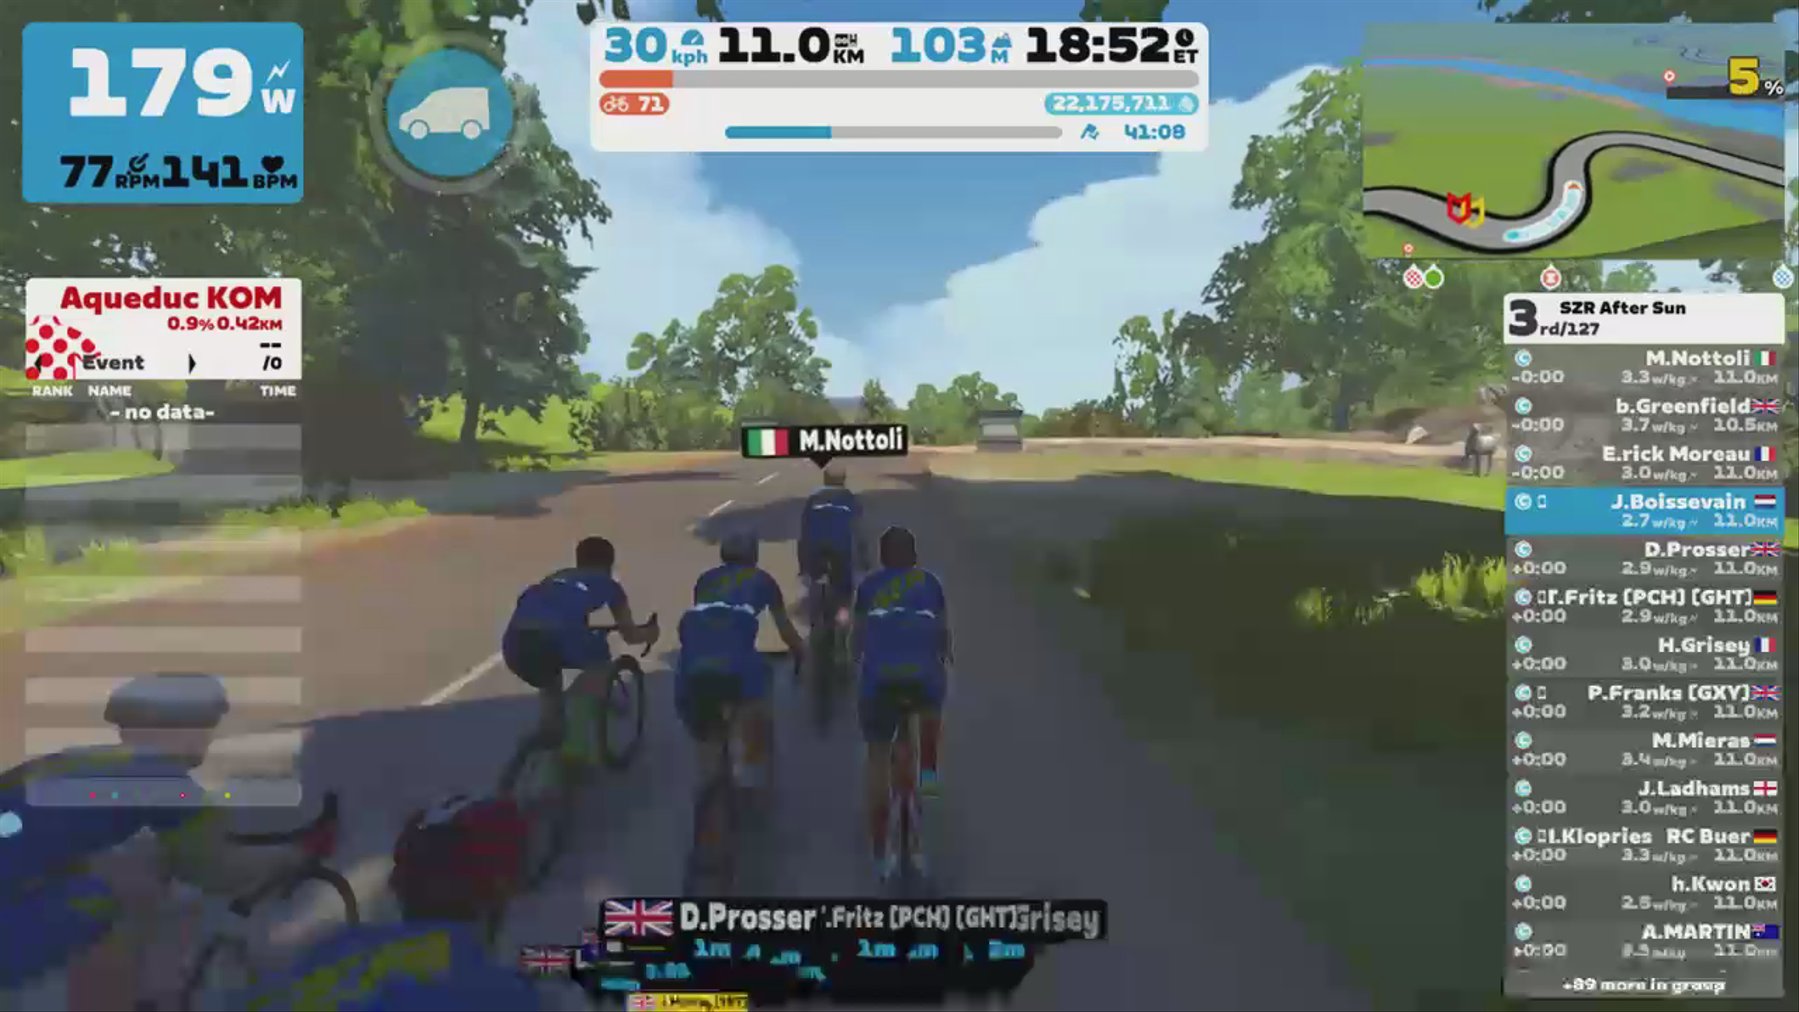 Zwift - Group Ride: SZR After Sun (C) on Douce France in France